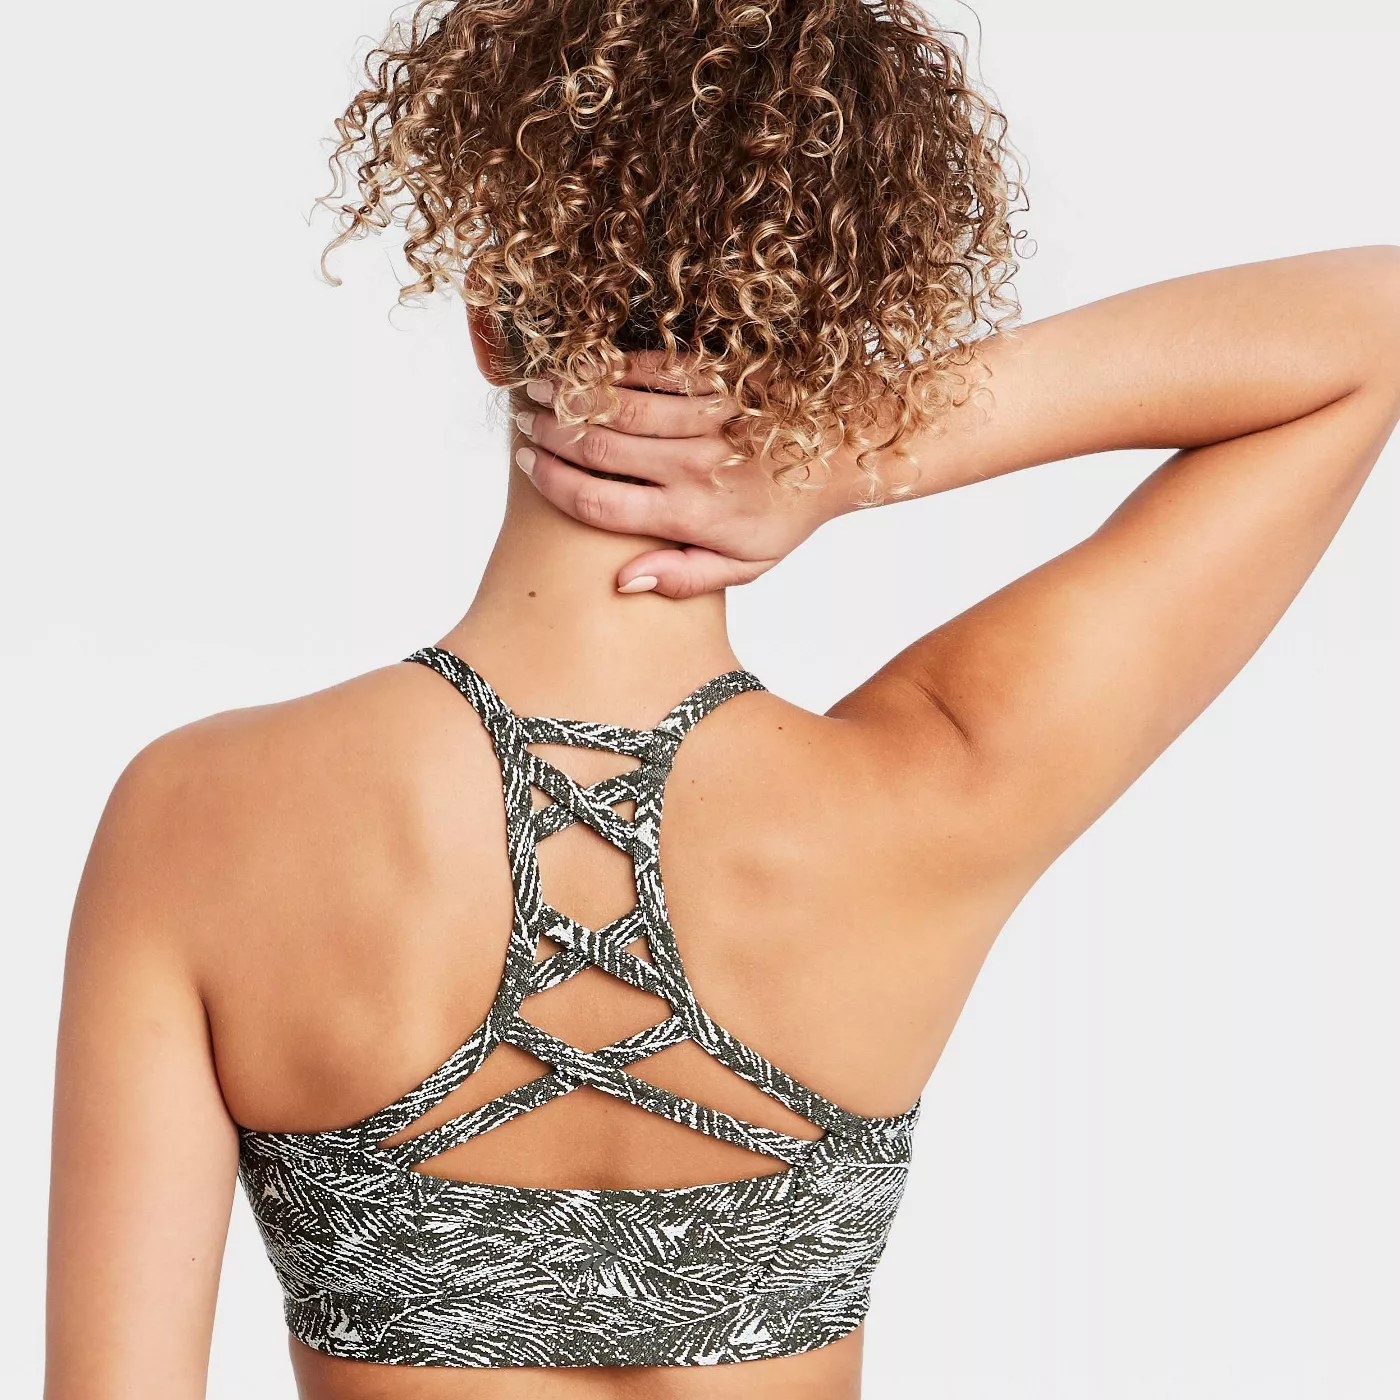 The sports bra in olive green